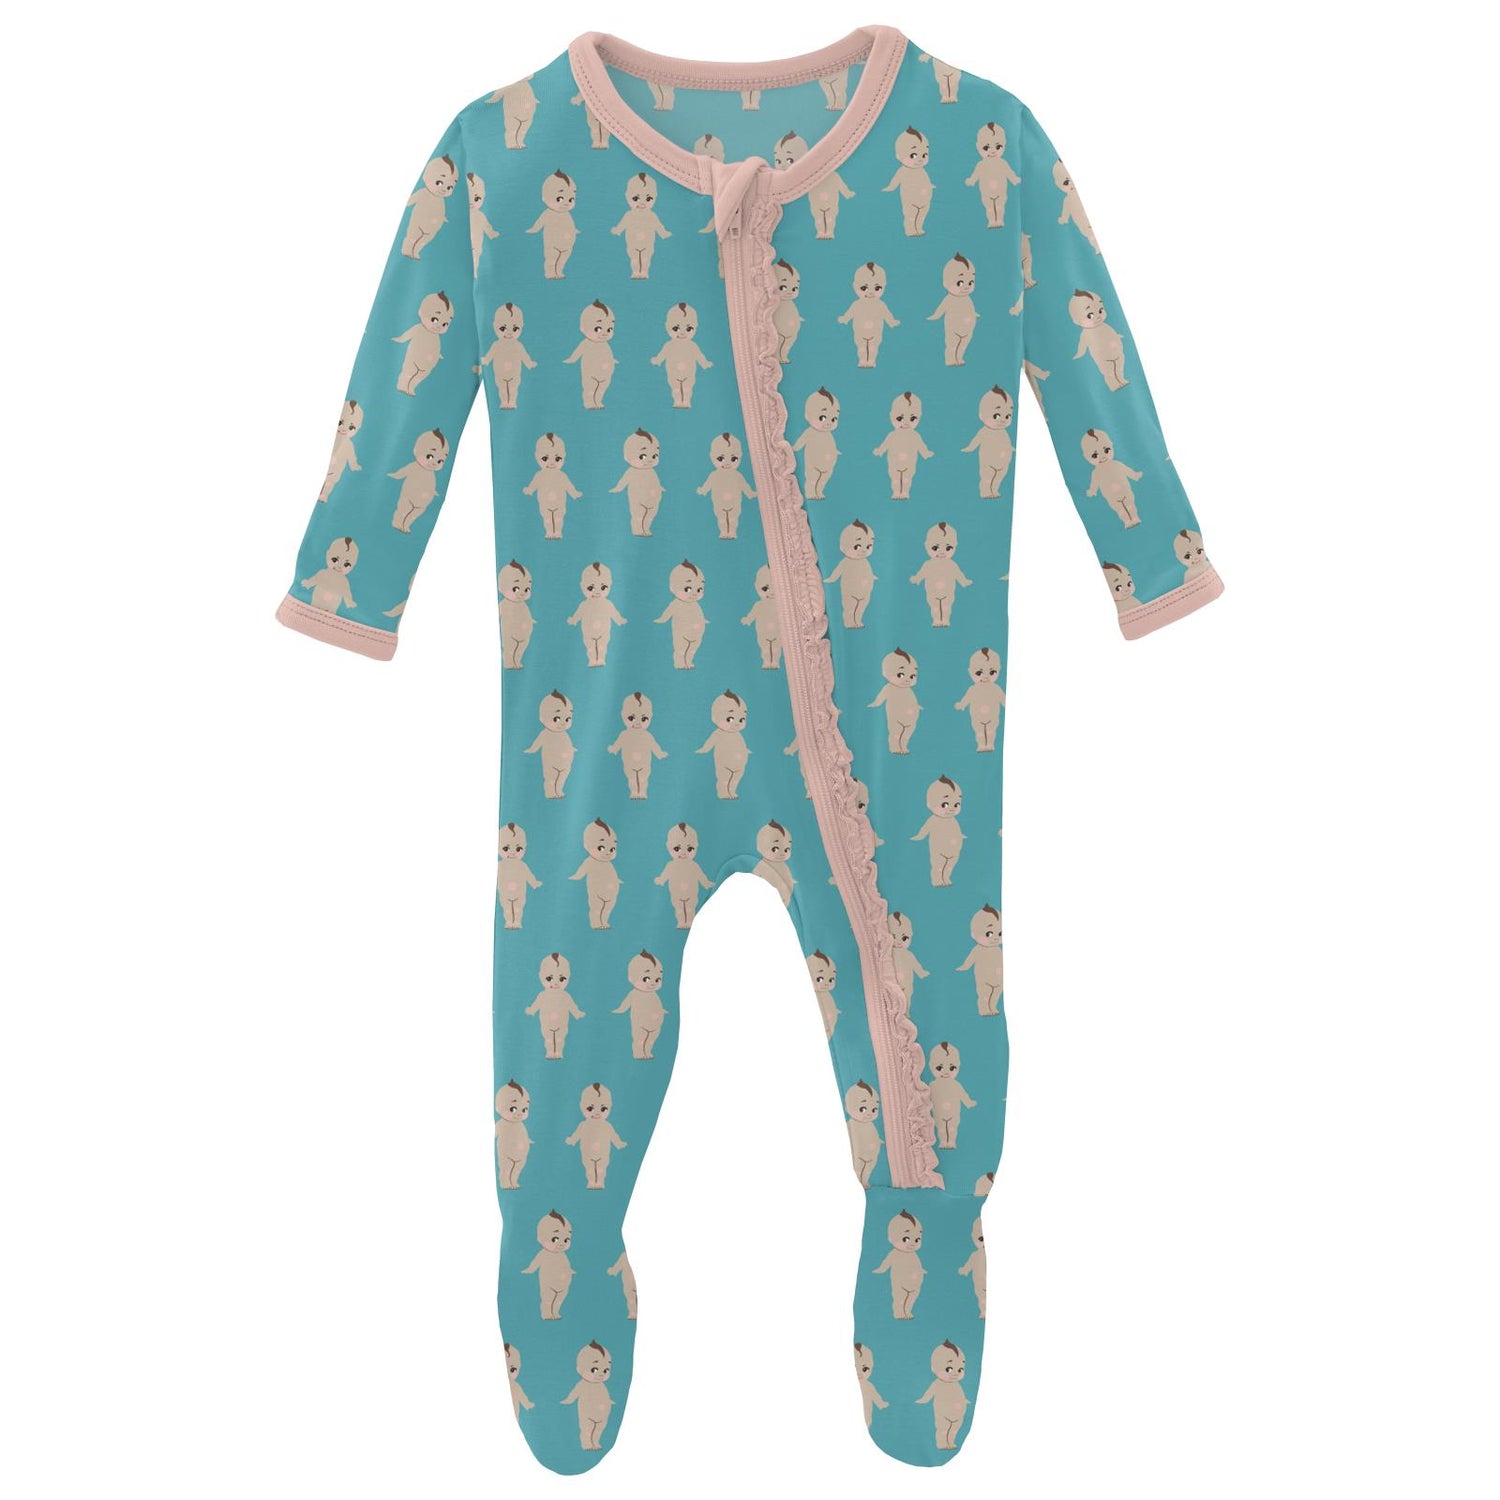 Print Muffin Ruffle Footie with Zipper in Glacier Baby Doll